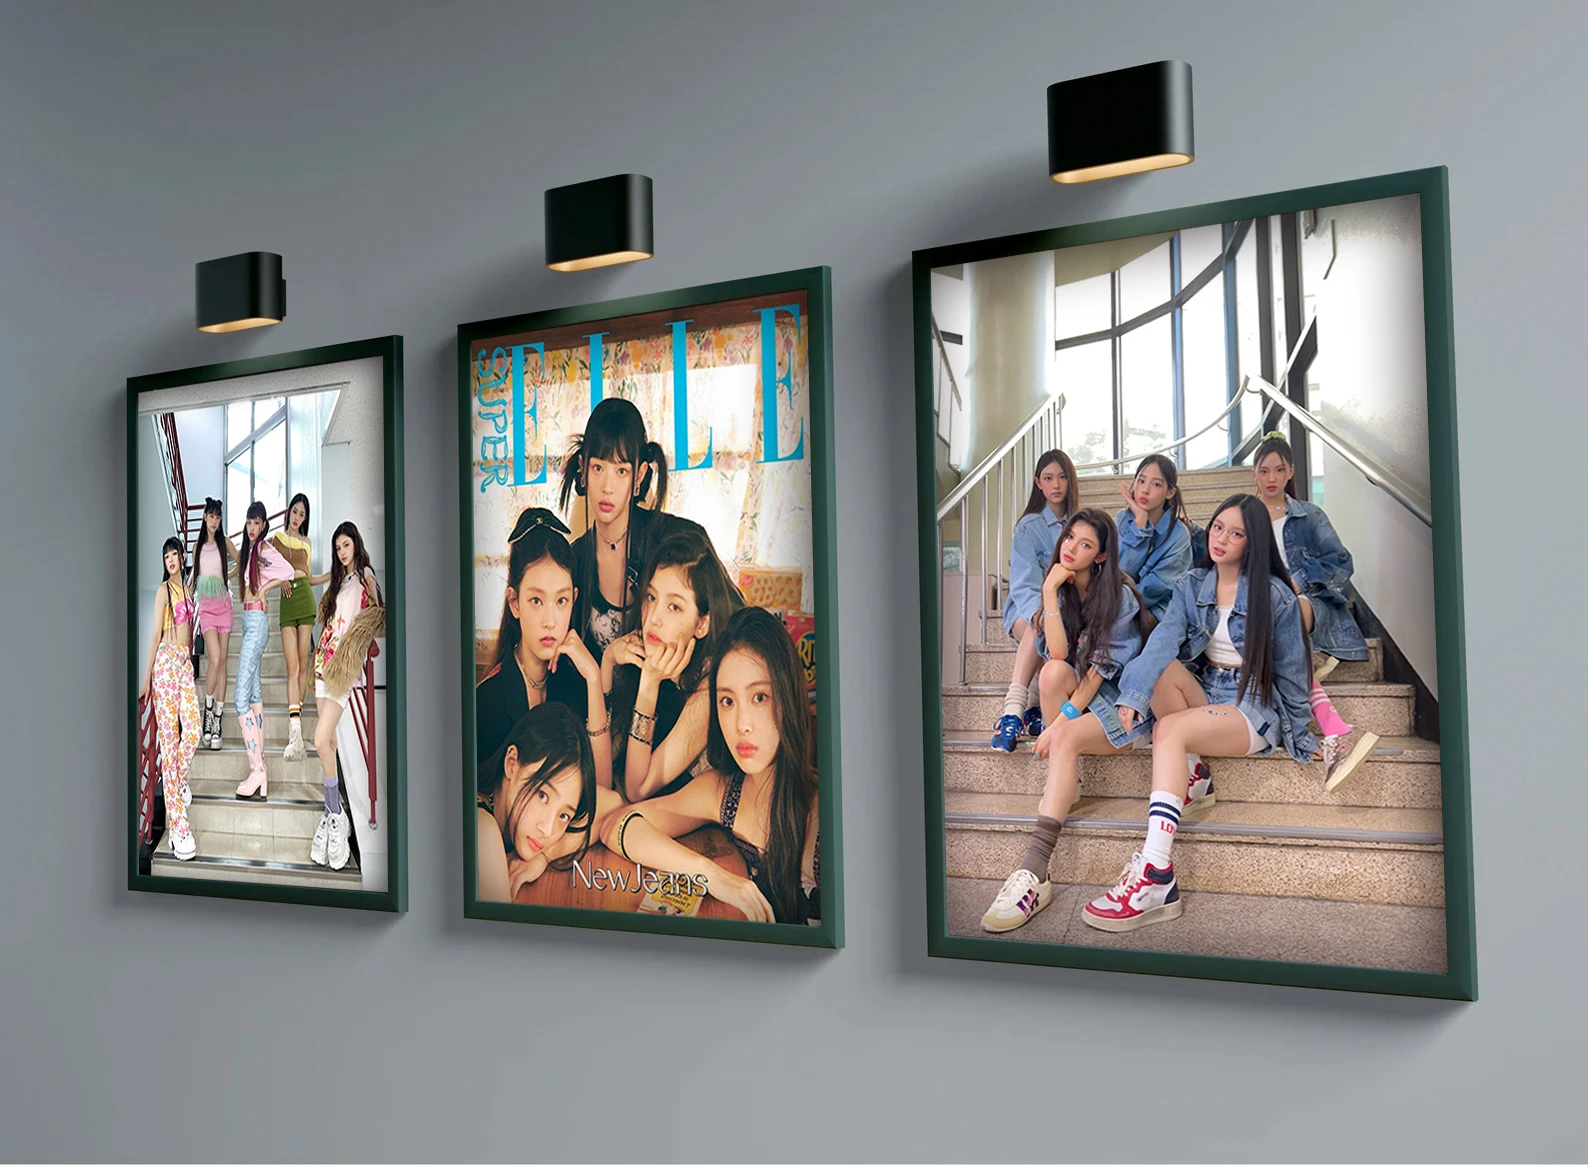 Korean Kpop Girl Group Idol New Jeans Music Album OMG Cover Rabbit Poster  Print Canvas Painting Wall Art Picture Home Room Decor